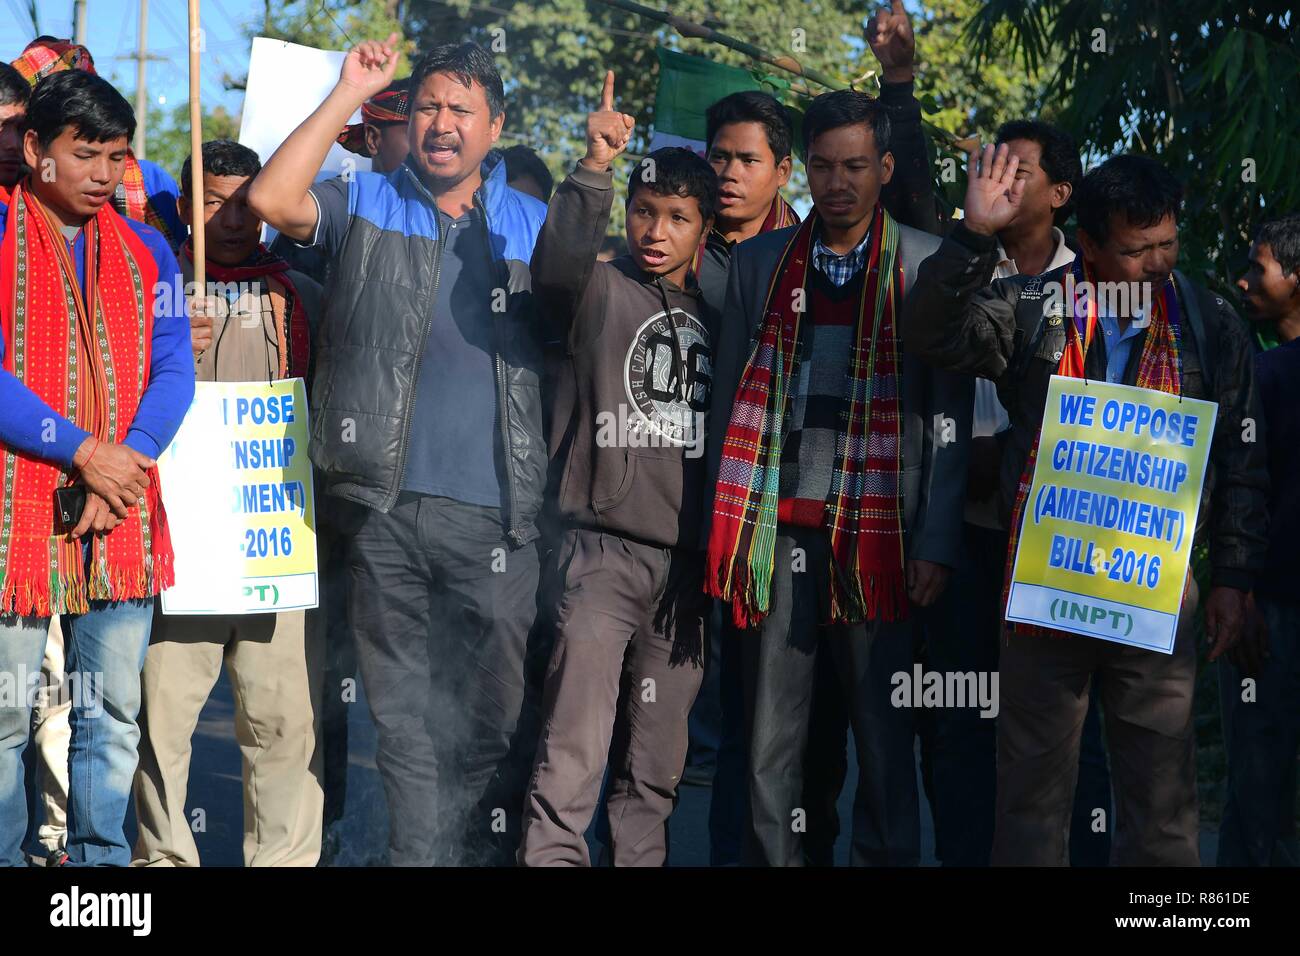 Agartala, Tripura, India. 10th Dec, 2018. Protesters are seen chanting slogans during the protest.INPT (Indigenous Nationalist Party of Twipra) leaders and supporters protest on the National High way in Khamtingbari, 40 km far from Agartala city to demand for the withdrawal of Citizenship Bill that was Introduced in July 19 in Lok Sabha, the Citizenship Amendment Bill 2016 seeks to allow illegal migrants from certain minority communities in Afghanistan, Bangladesh and Pakistan eligible for Indian citizenship. In other words, it amends the Citizenship Act of 1955. (Credit Image: © Abhisek Stock Photo